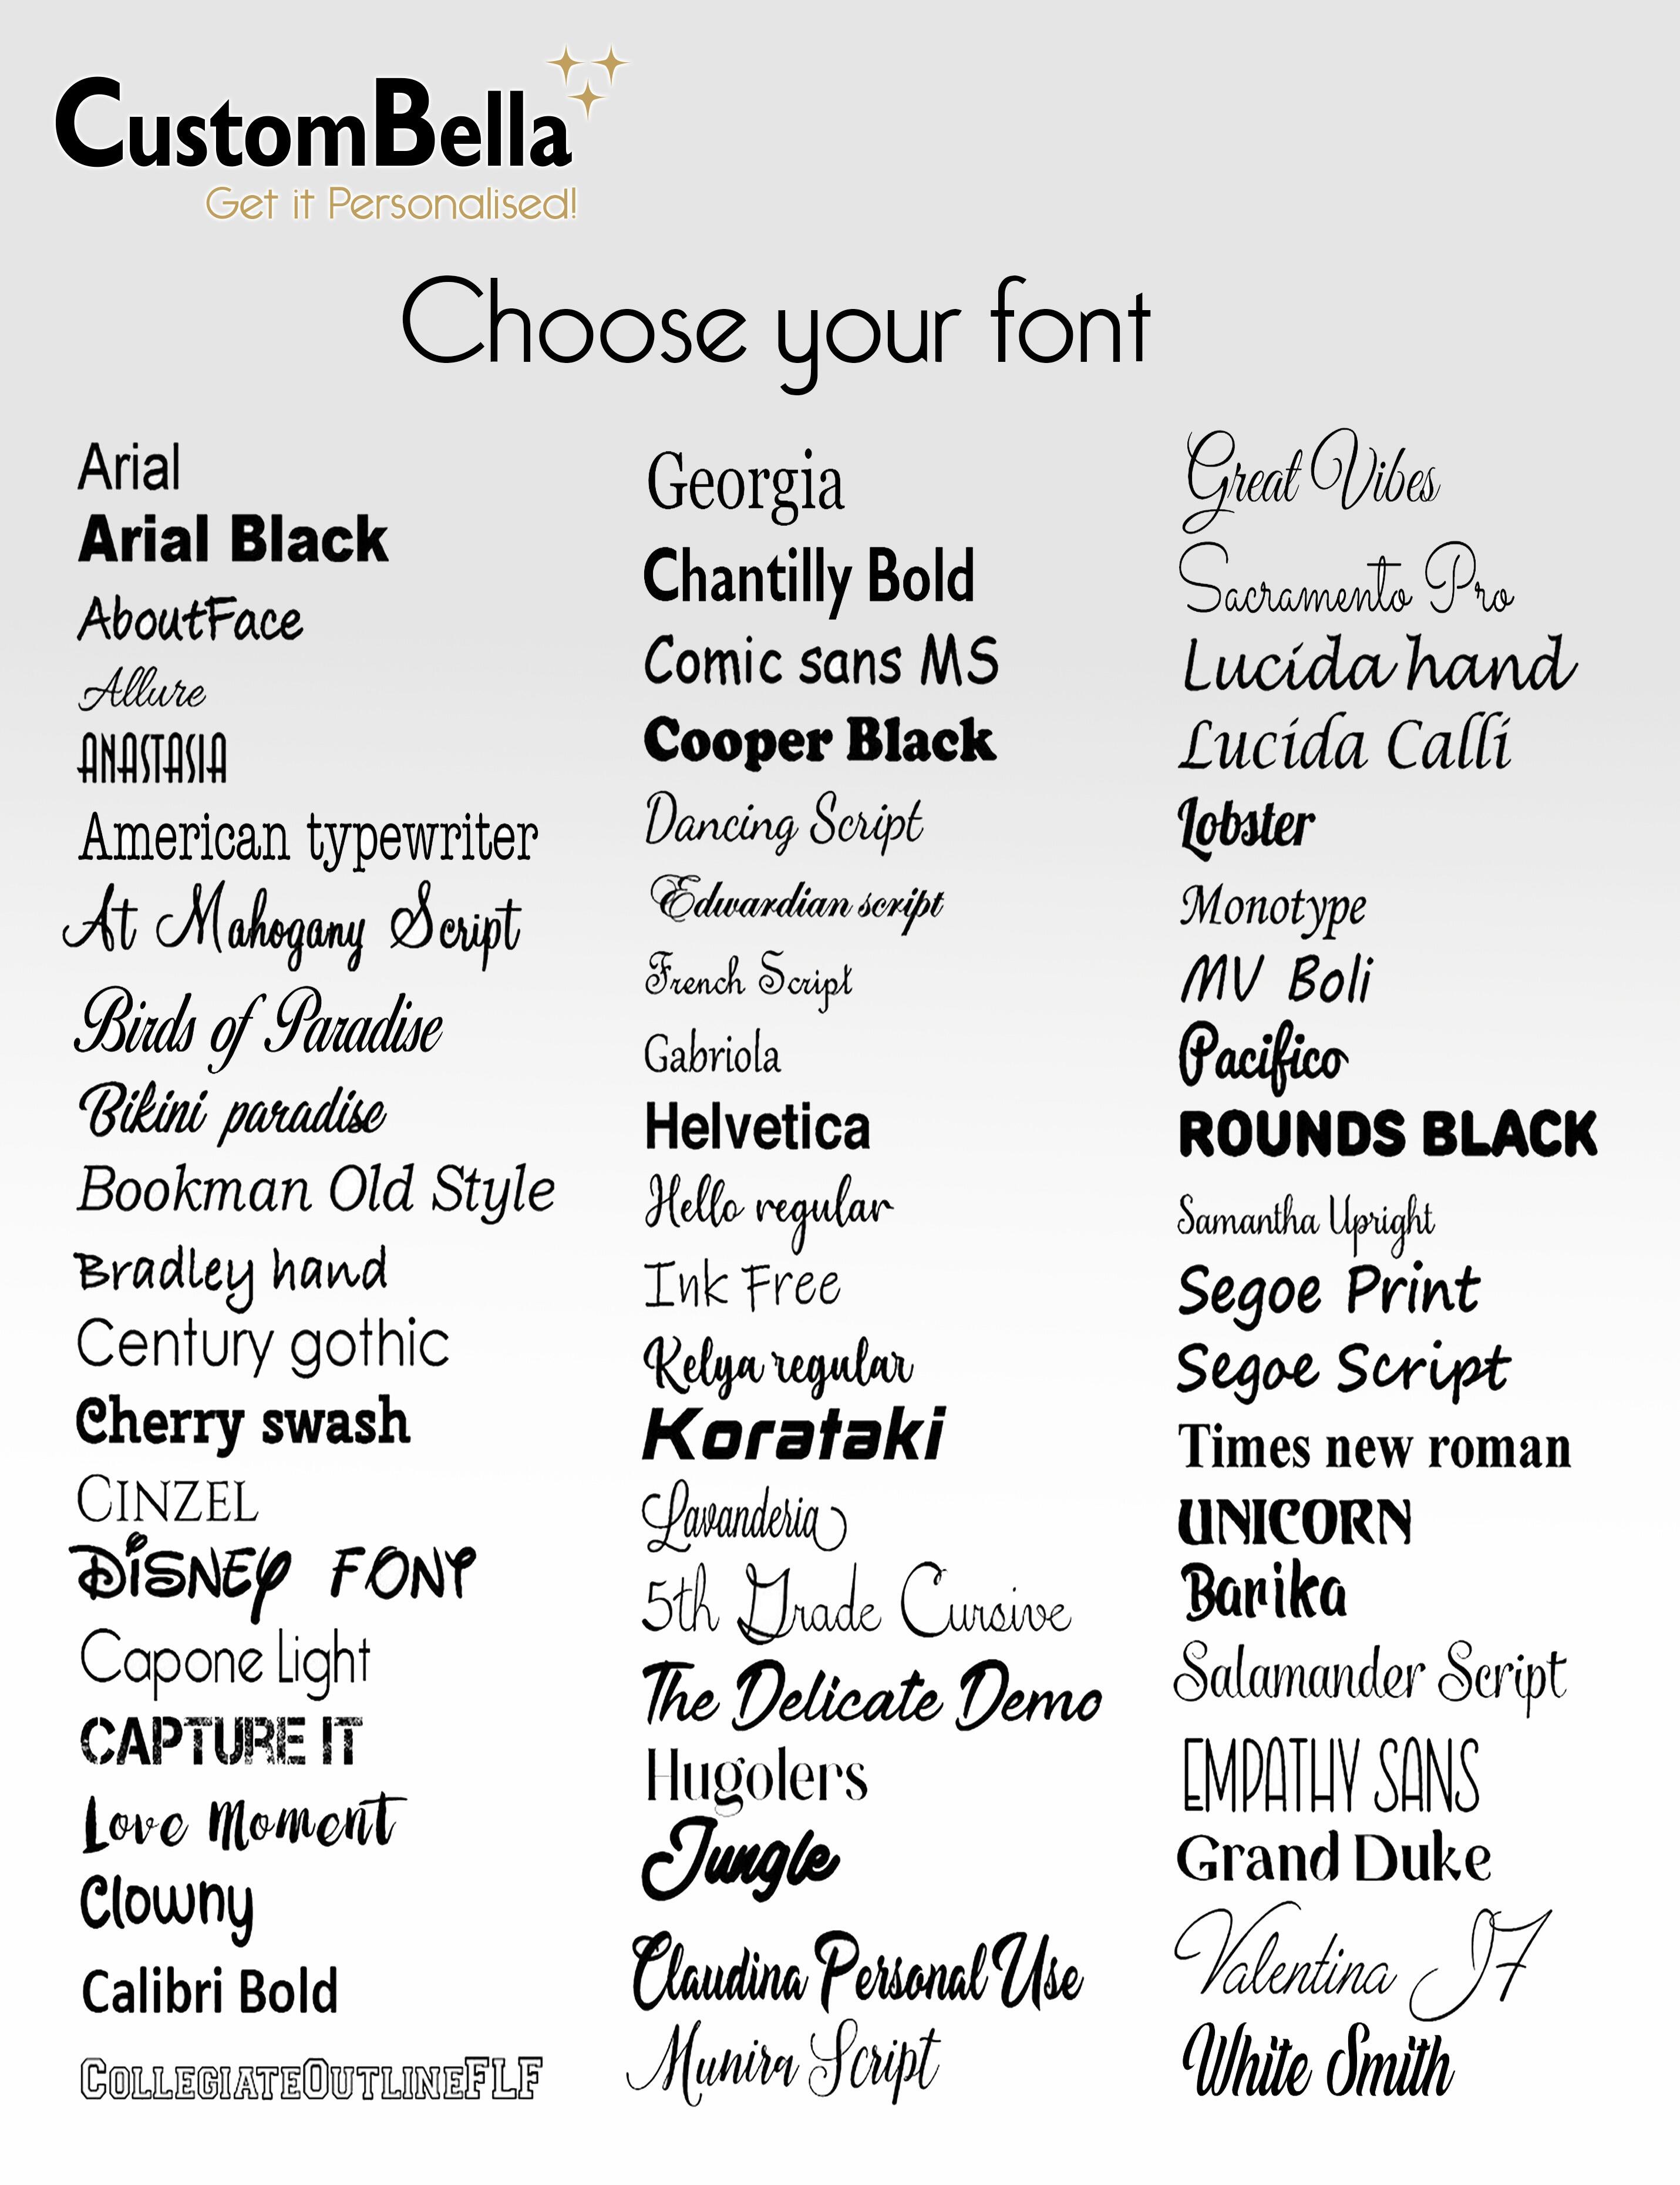 Custombella fonts to select to embroidery